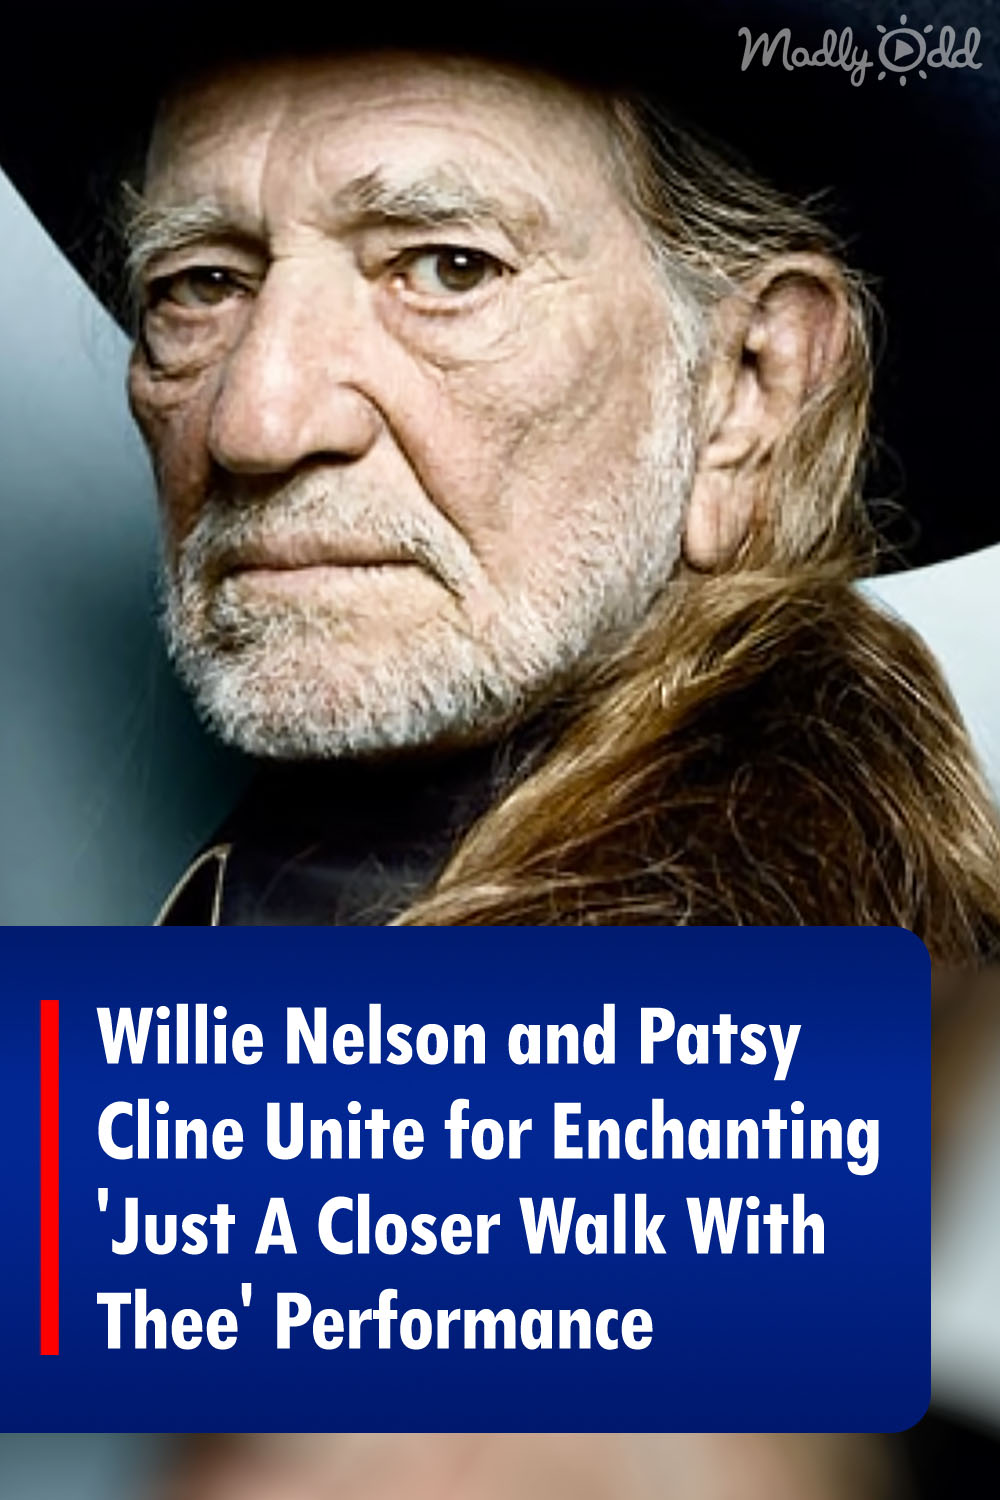 Willie Nelson and Patsy Cline Unite for Enchanting \'Just A Closer Walk With Thee\' Performance